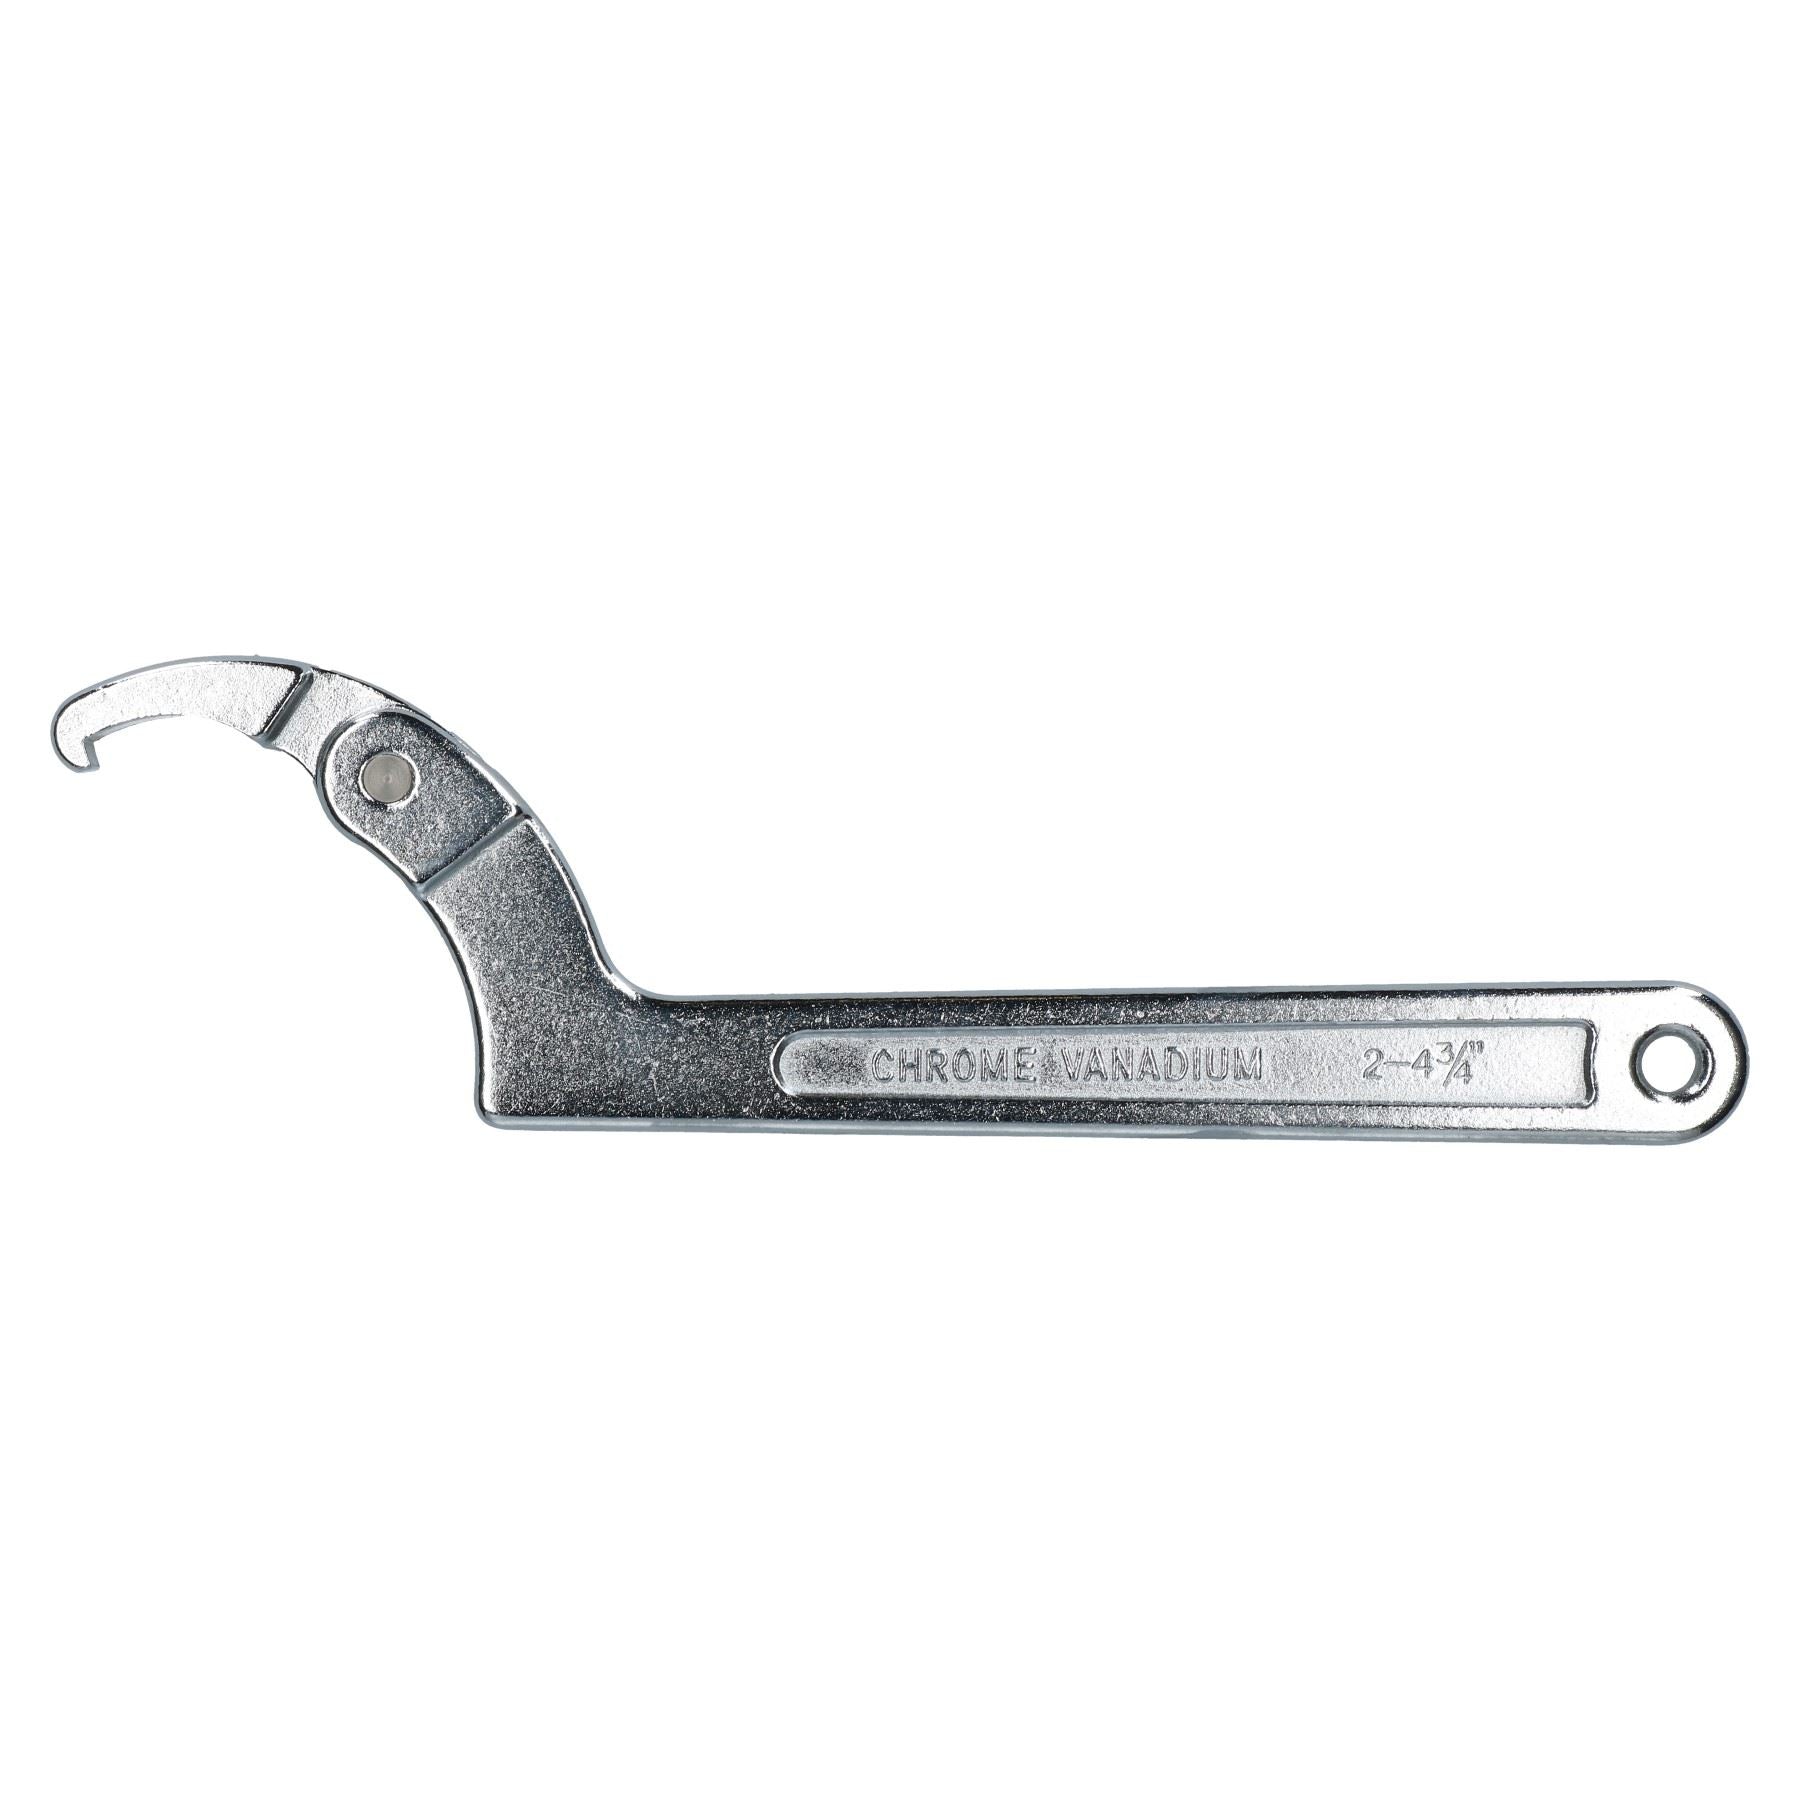 Adjustable Hook And Pin Wrench Spanners C Spanner 35mm - 120mm 6pc